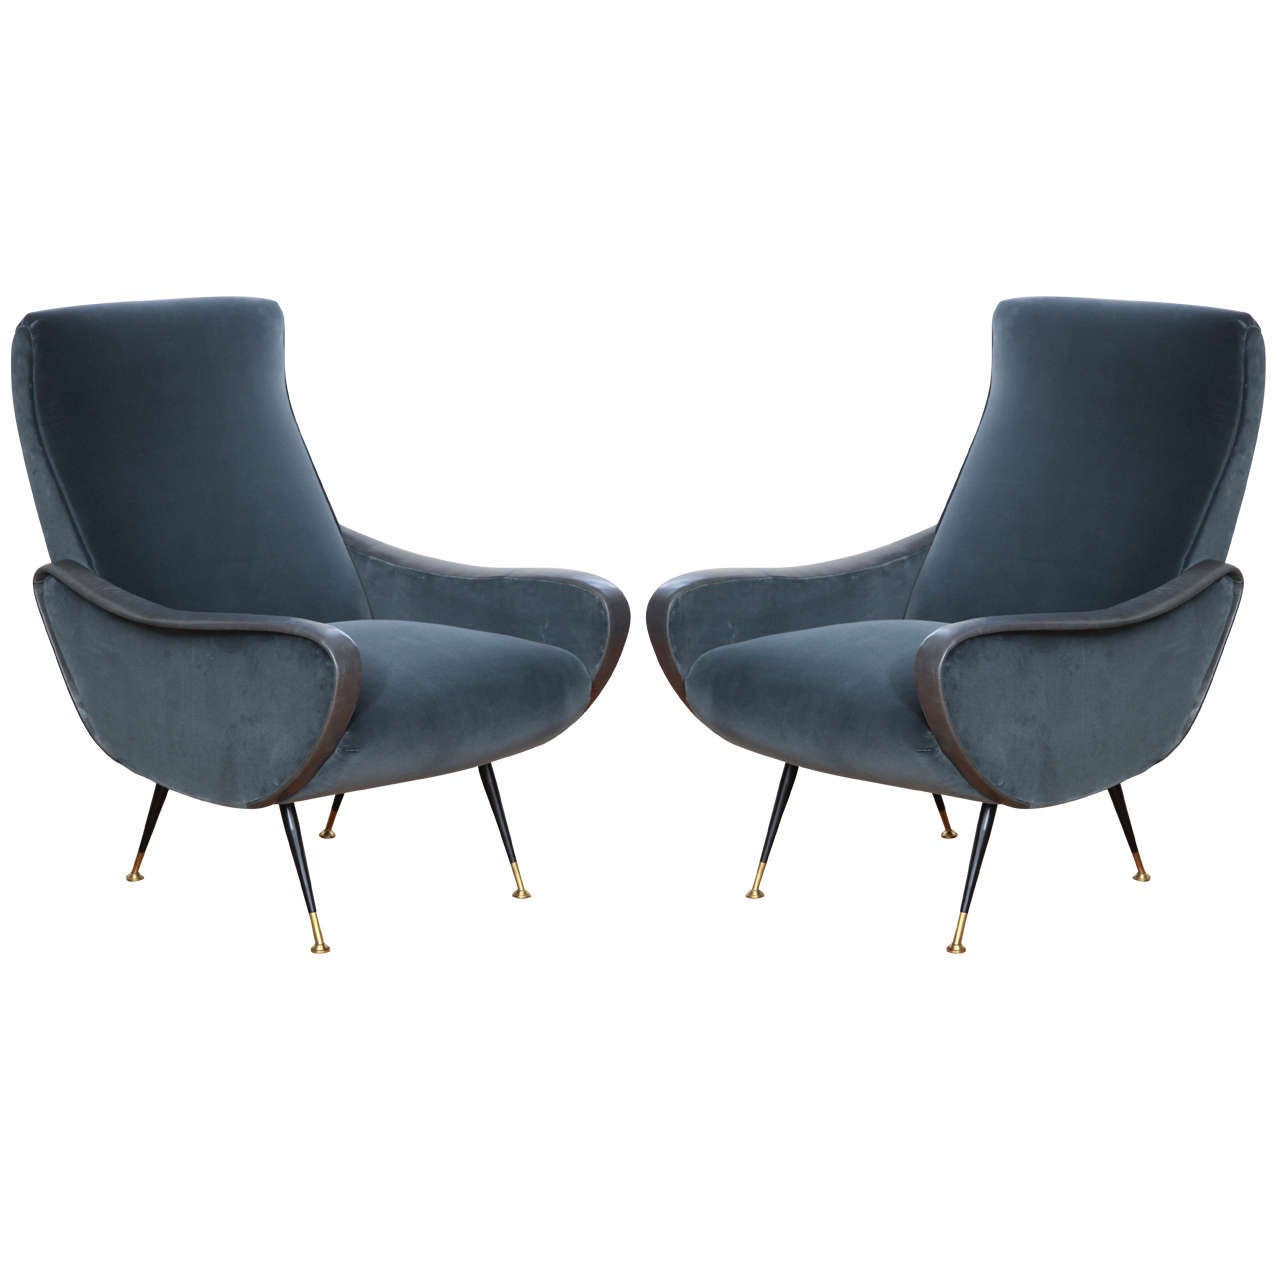 Elegant Pair of Mid-Century Modernist Armchairs For Sale